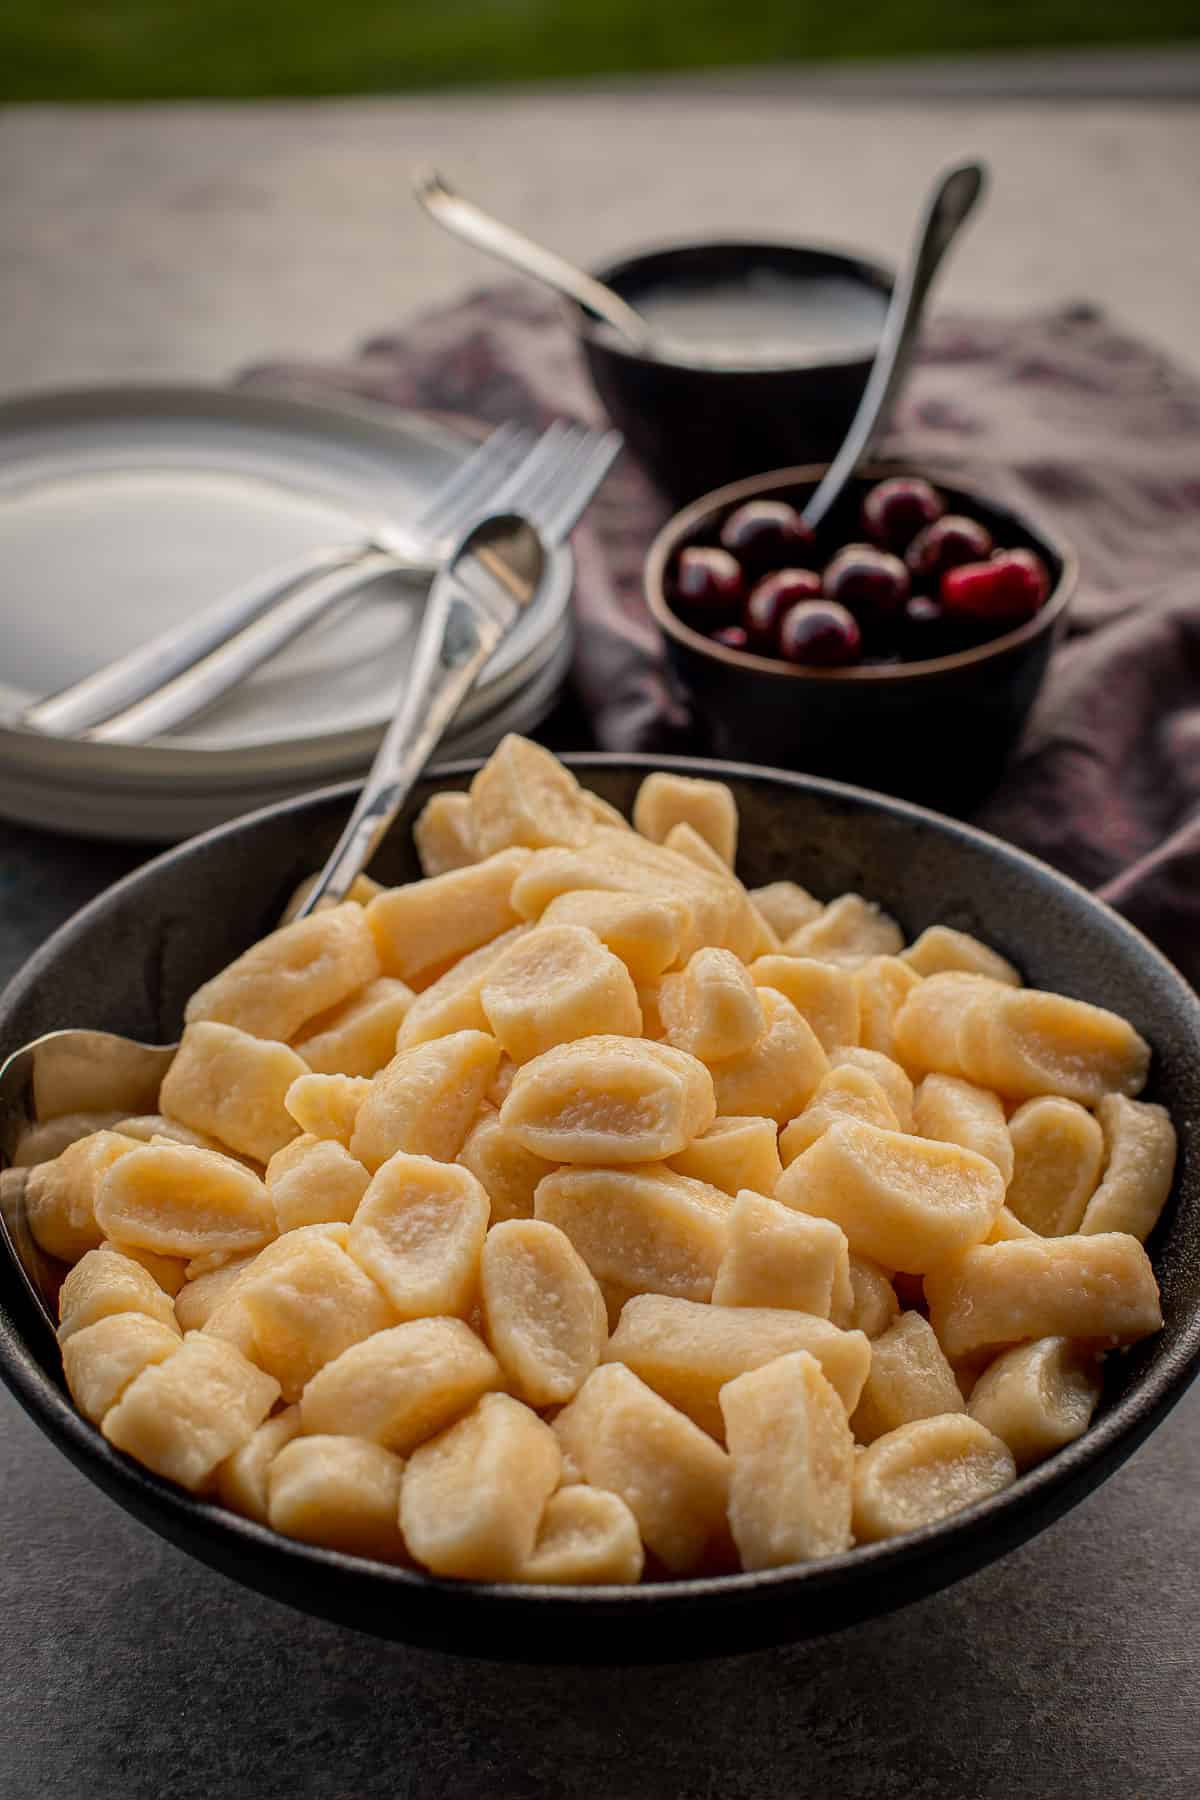 Lazy pierogies in a bowl, with cherries in a smaller bowl in the background, plates and forks.